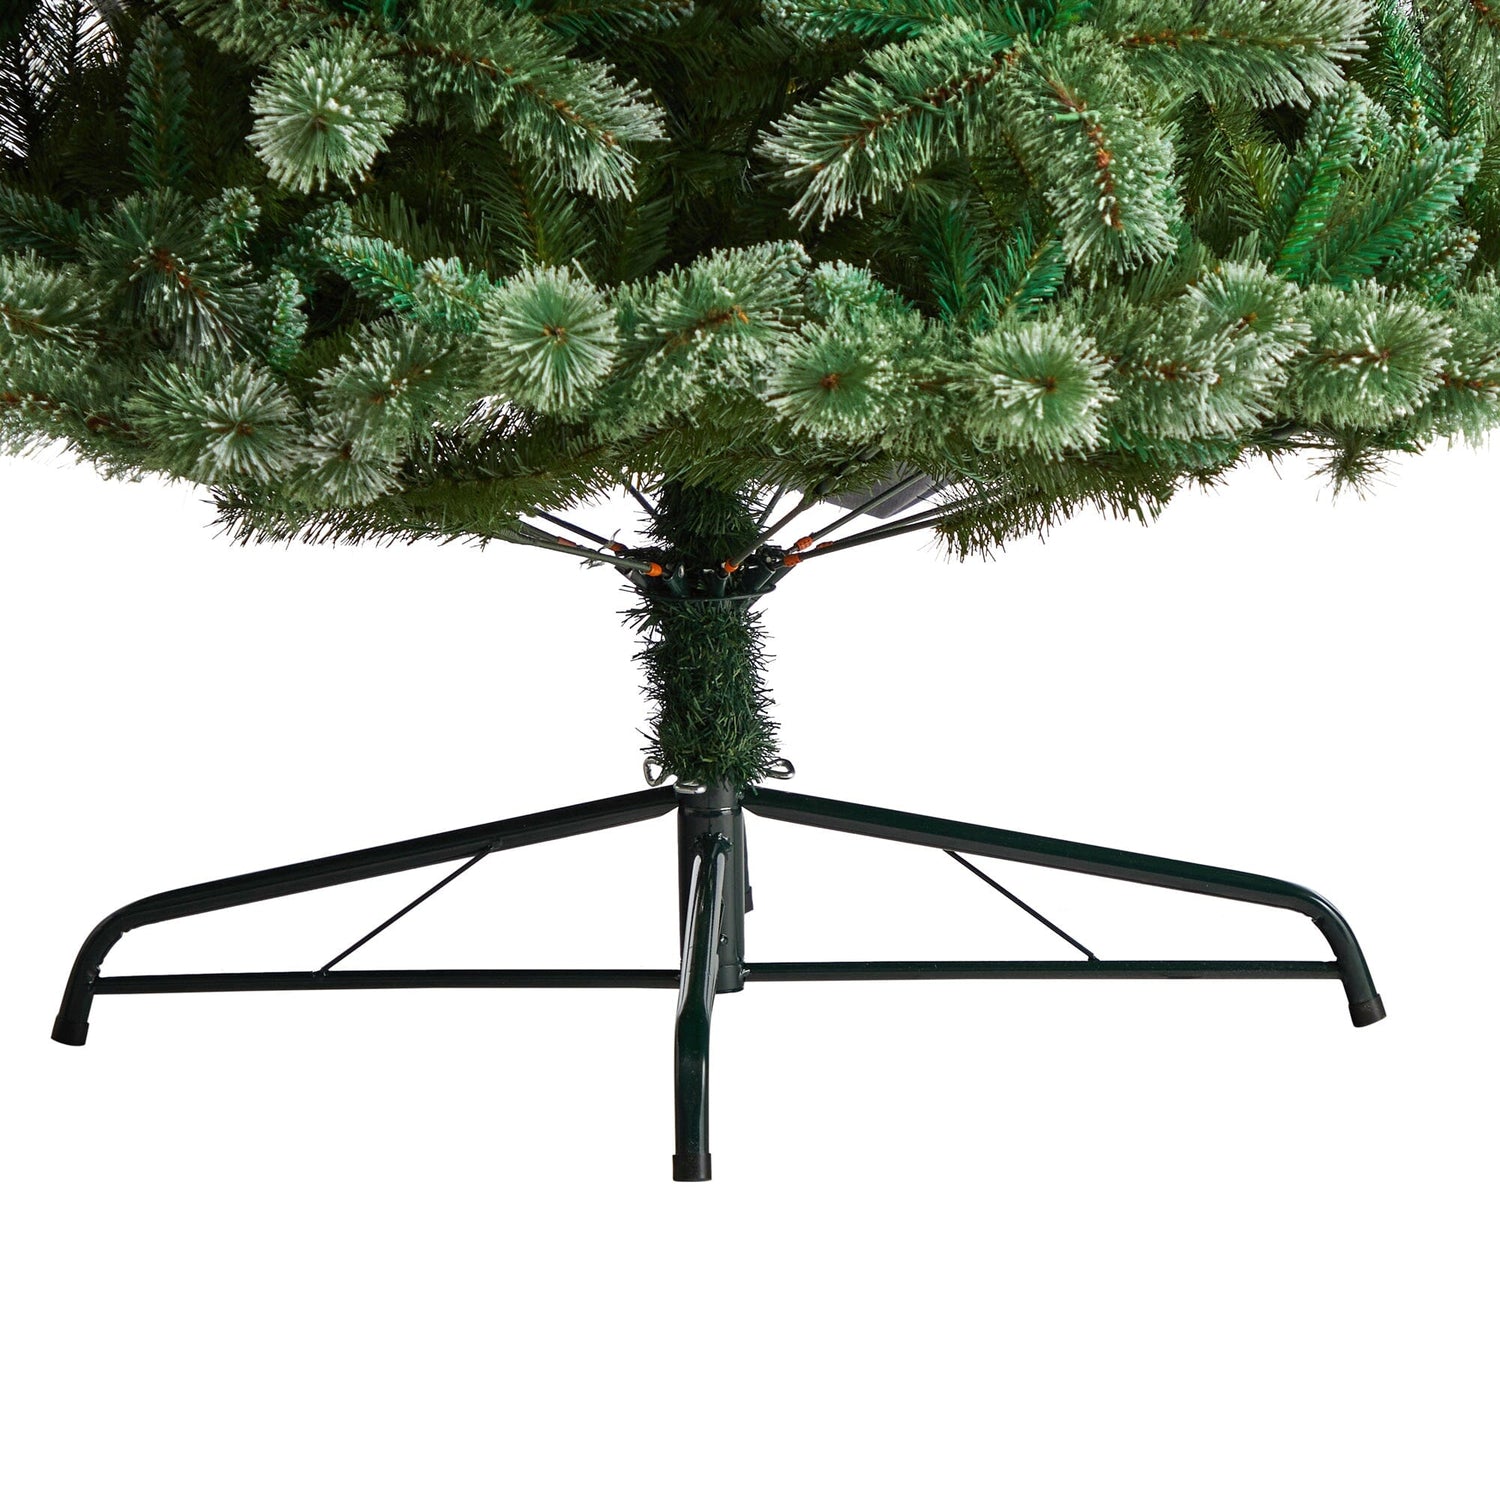 10’ Wisconsin Slim Snow Tip Pine Artificial Christmas Tree with 1652 Bendable Branches